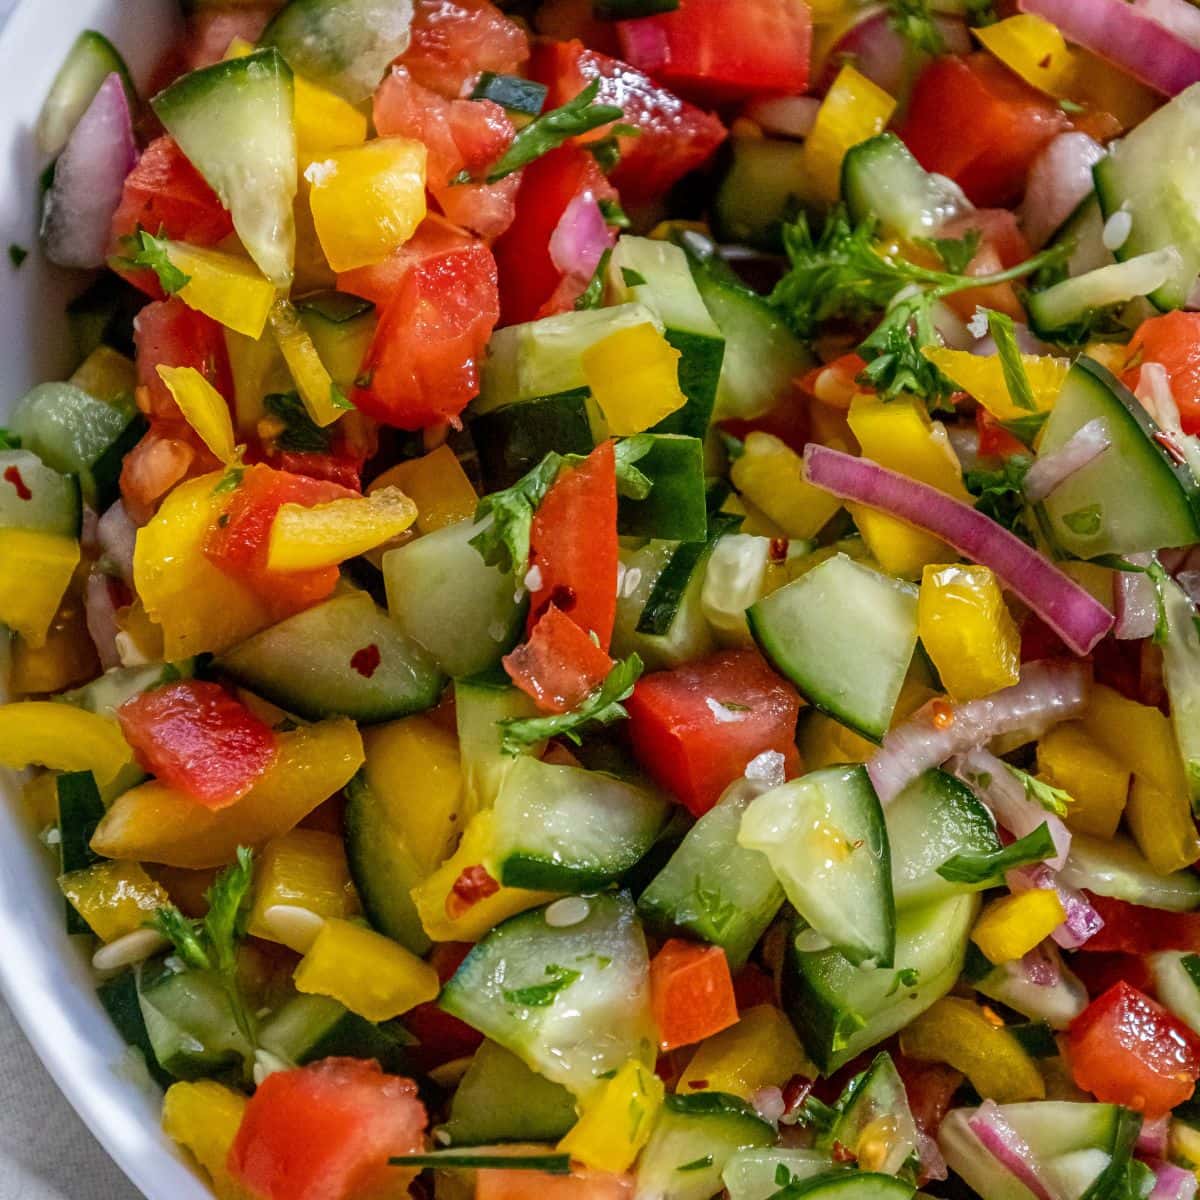 chopped bell pepper, cucumber, cherry tomatoes, red onion, and parsley in a white bowl